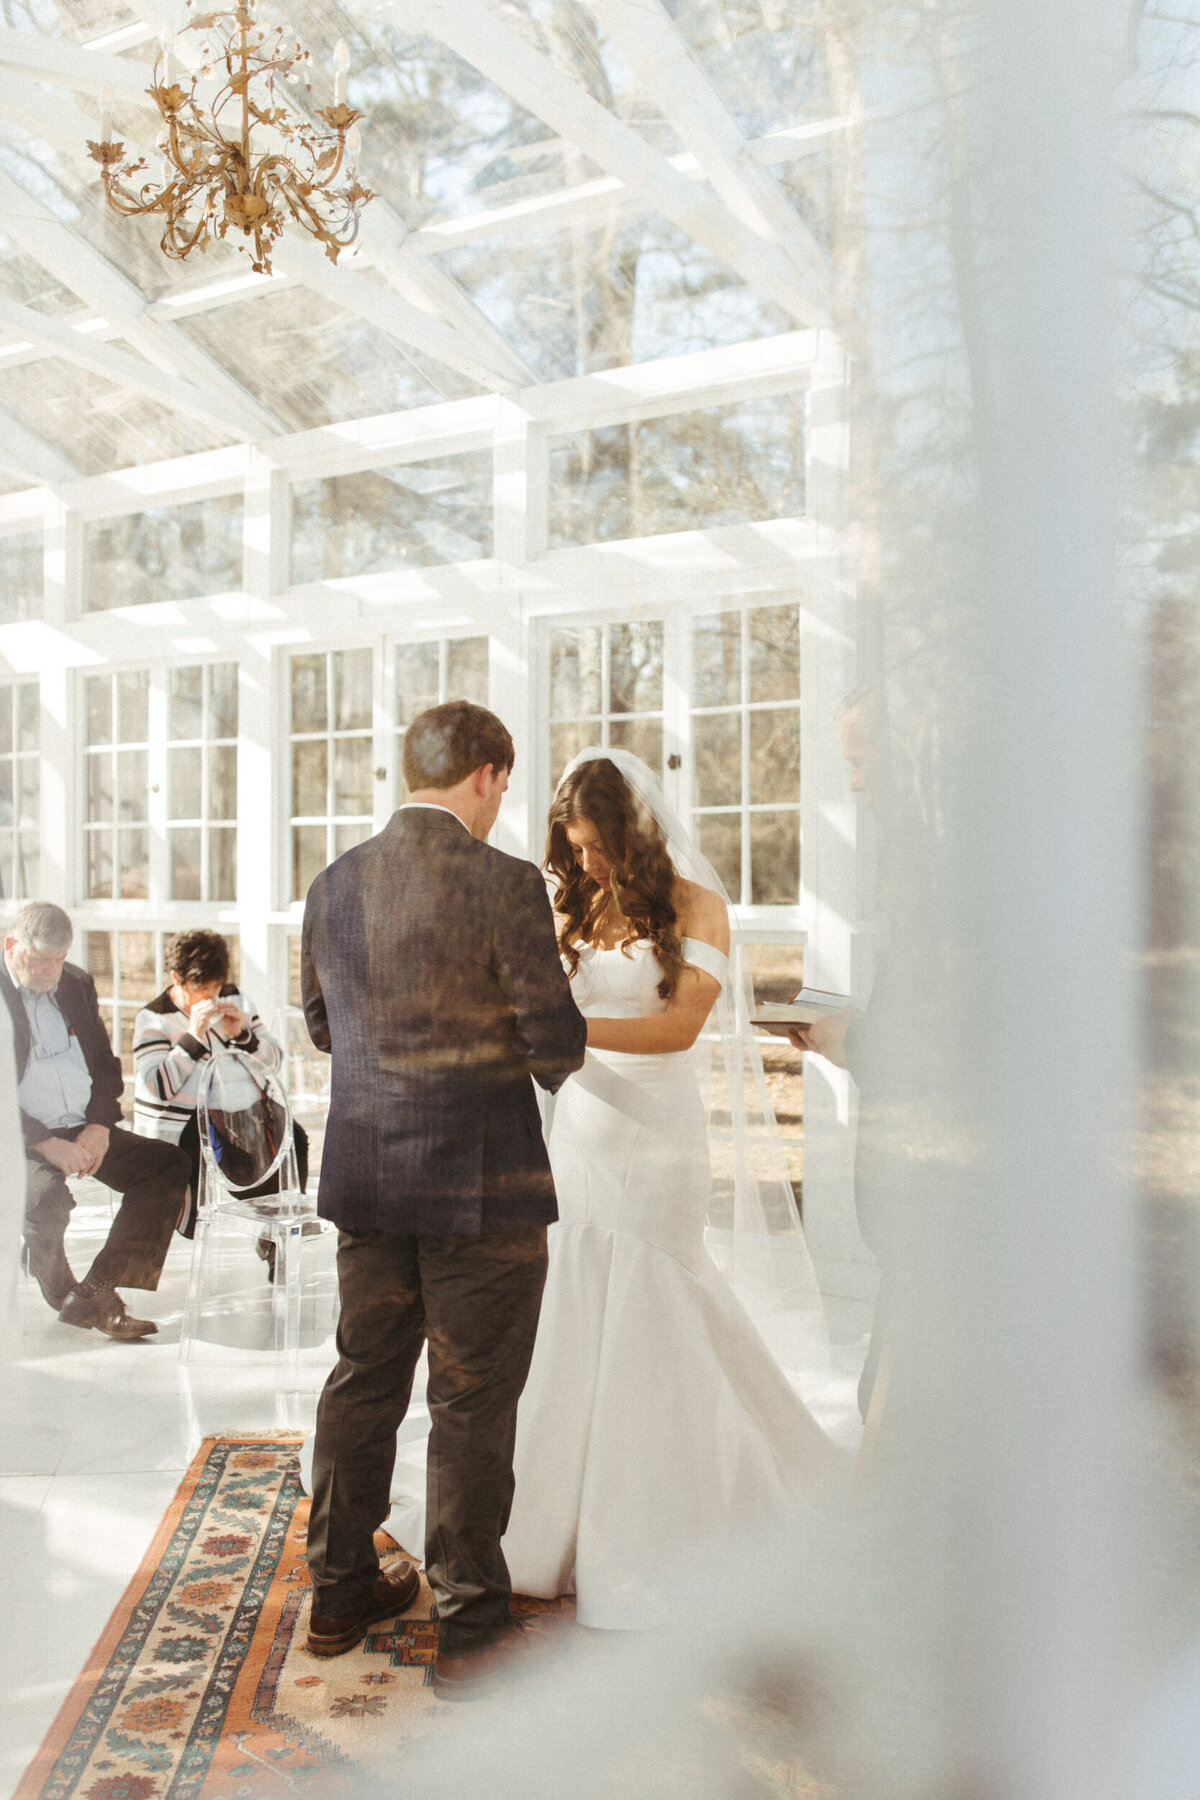 View of a bride and groom exchanging vows from the outside of the atelier through a window